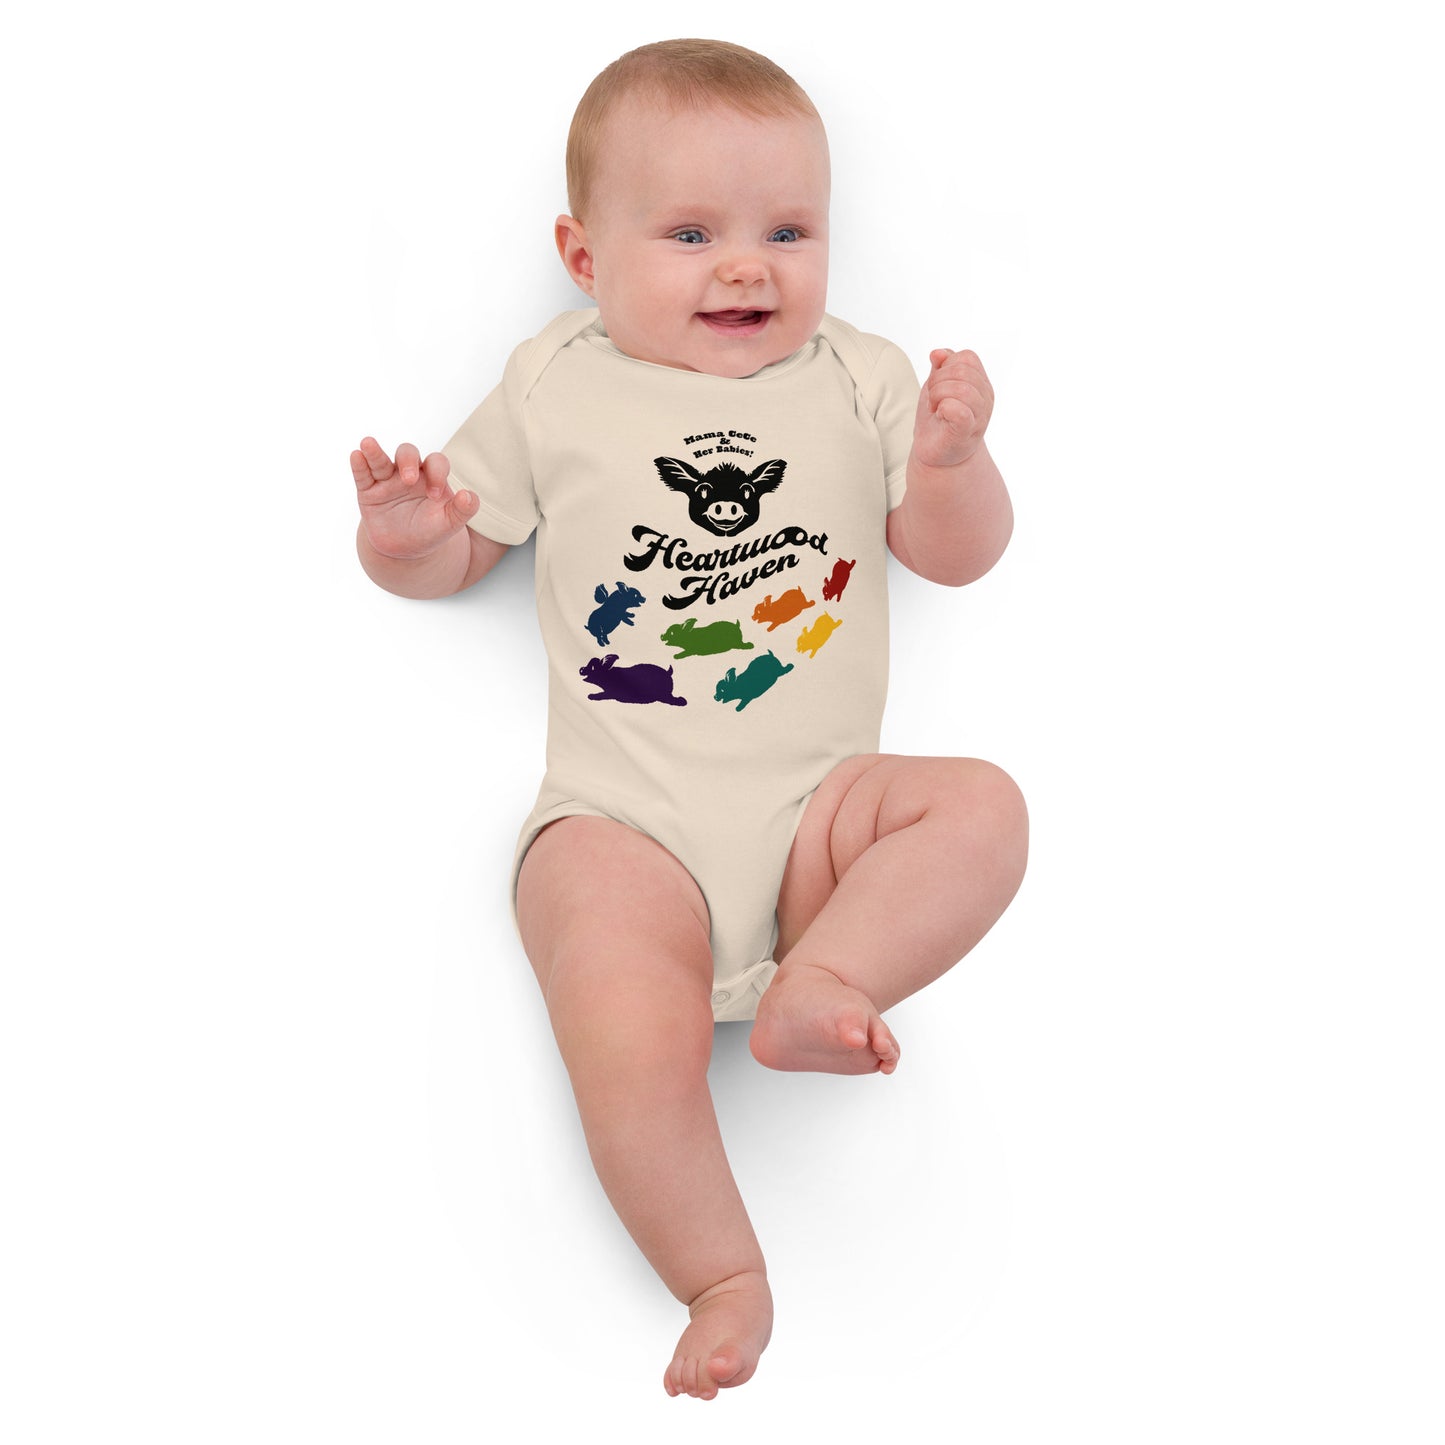 Heartwood Haven - Mama CeCe & Her Babies - Organic cotton baby bodysuit